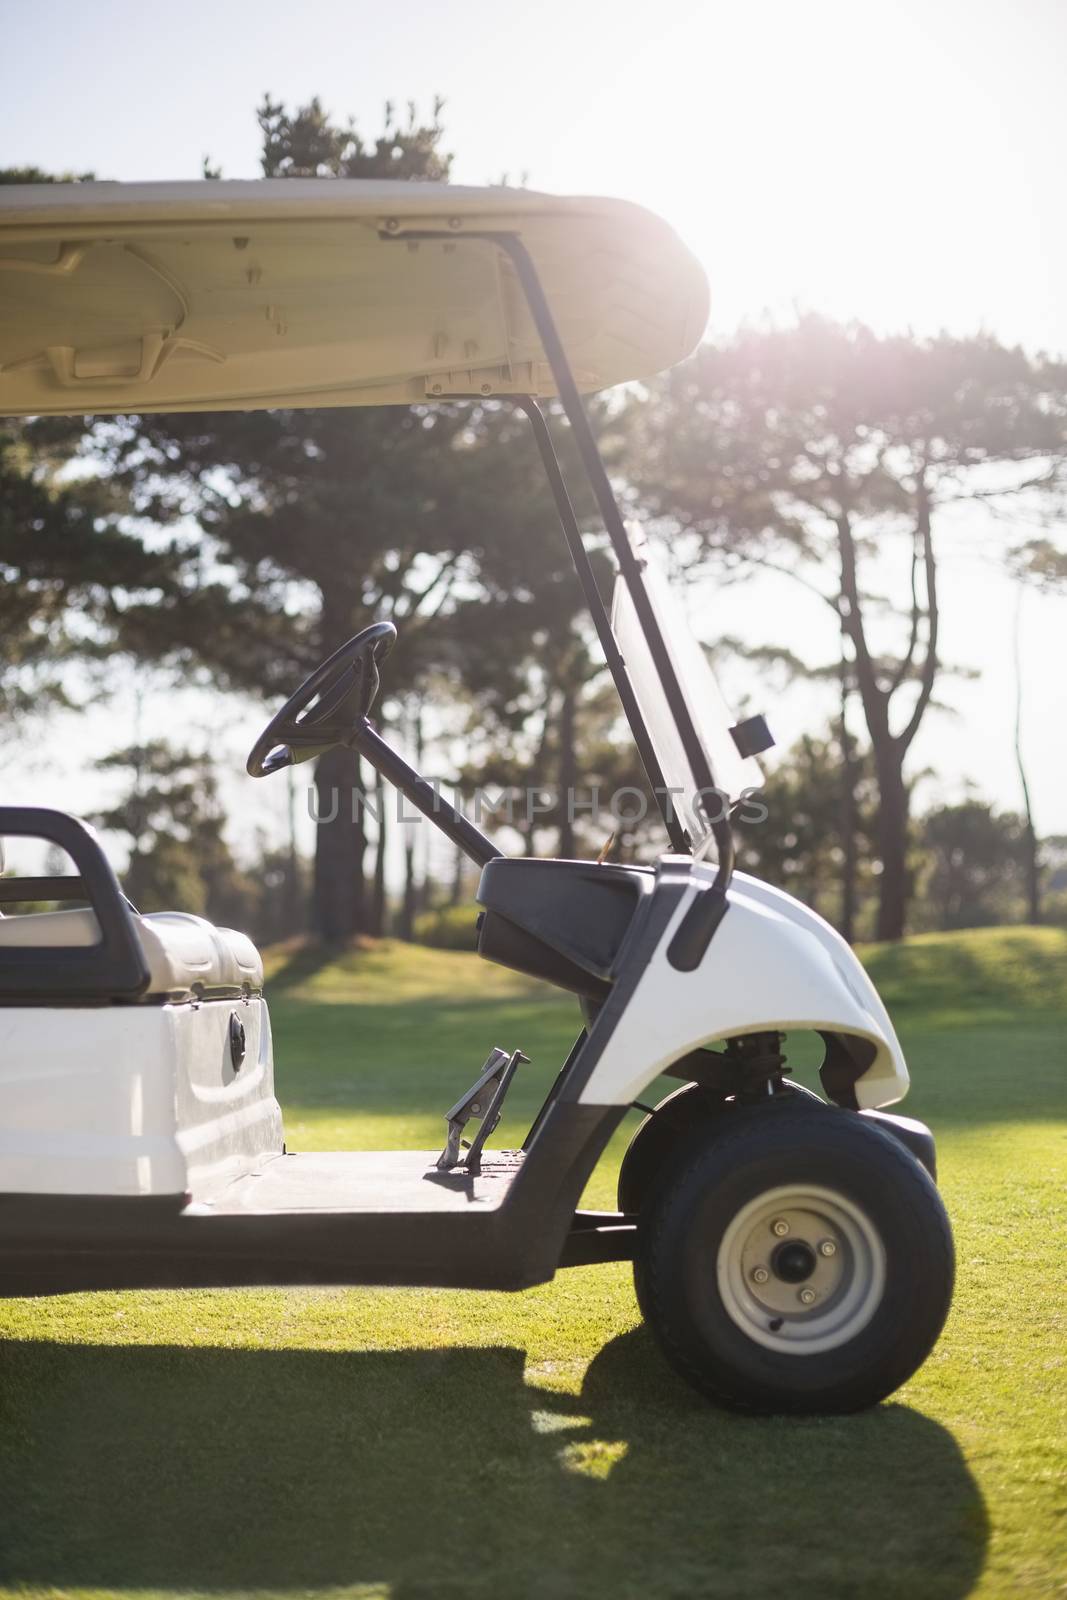 White golf buggy on field during sunny day